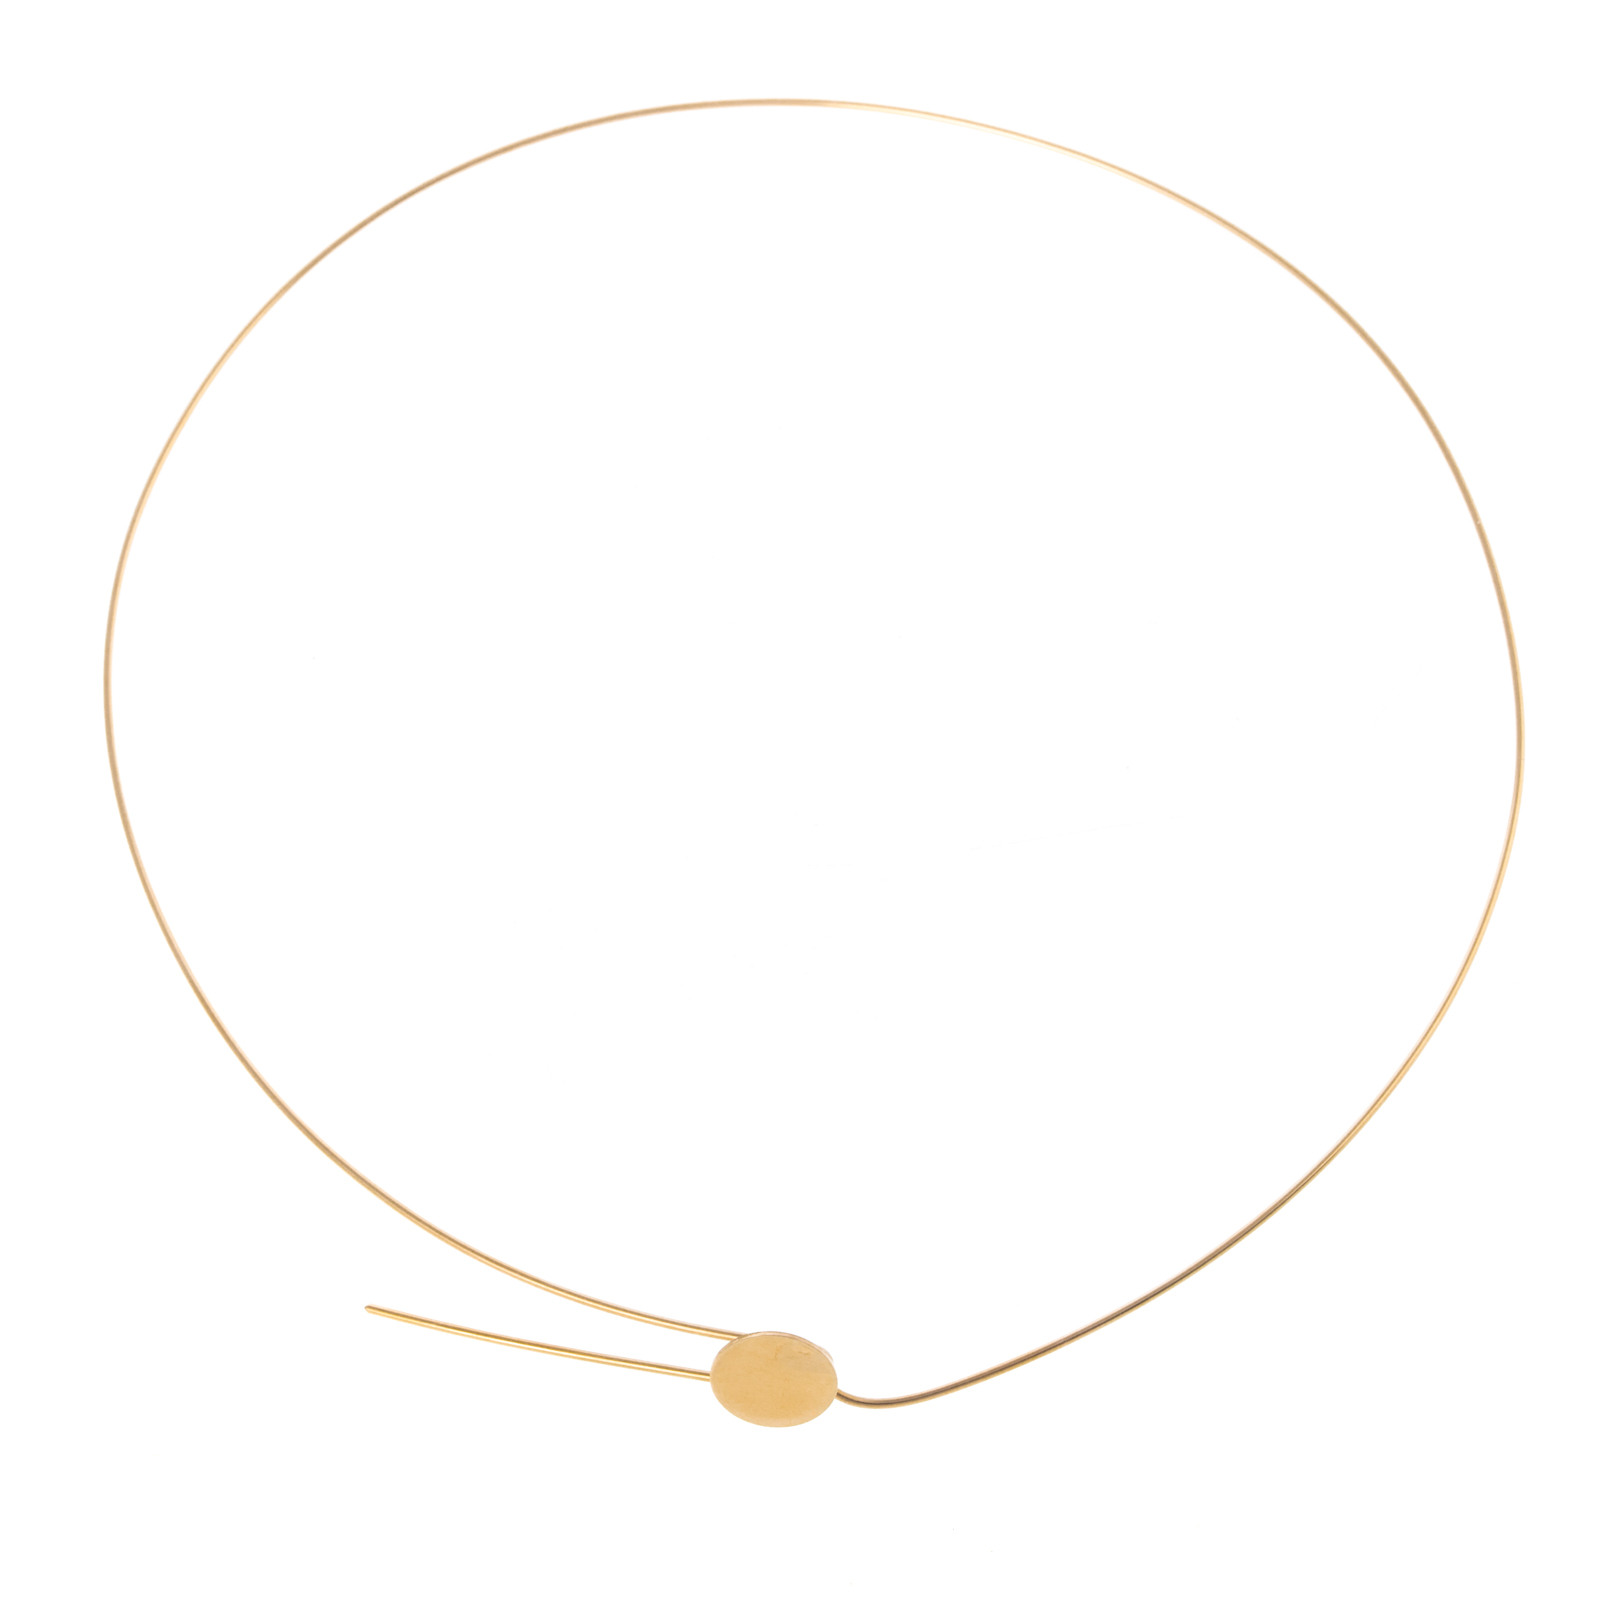 A 14K YELLOW GOLD WIRE NECKLACE WITH